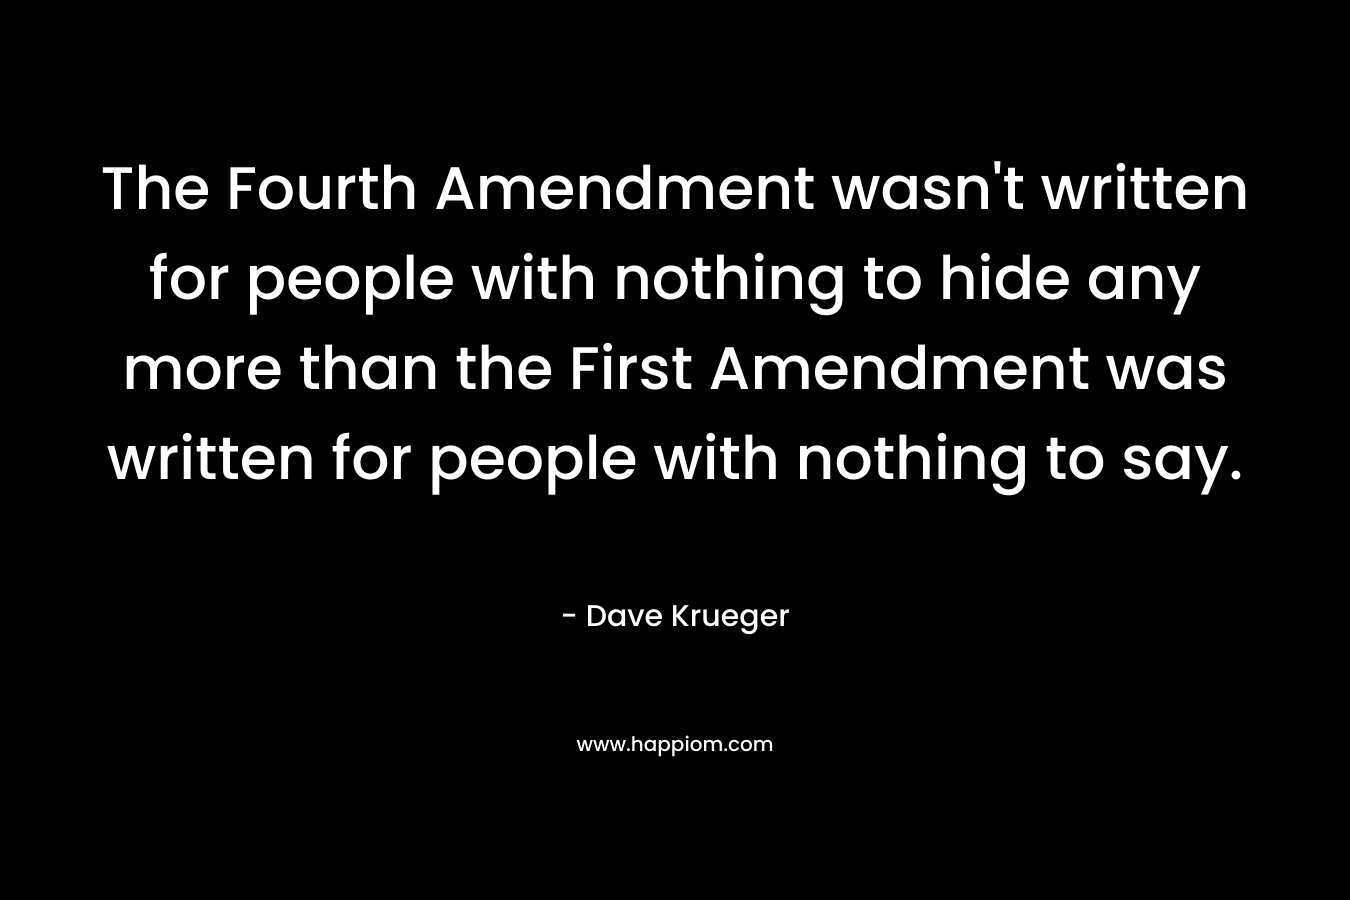 The Fourth Amendment wasn’t written for people with nothing to hide any more than the First Amendment was written for people with nothing to say. – Dave Krueger